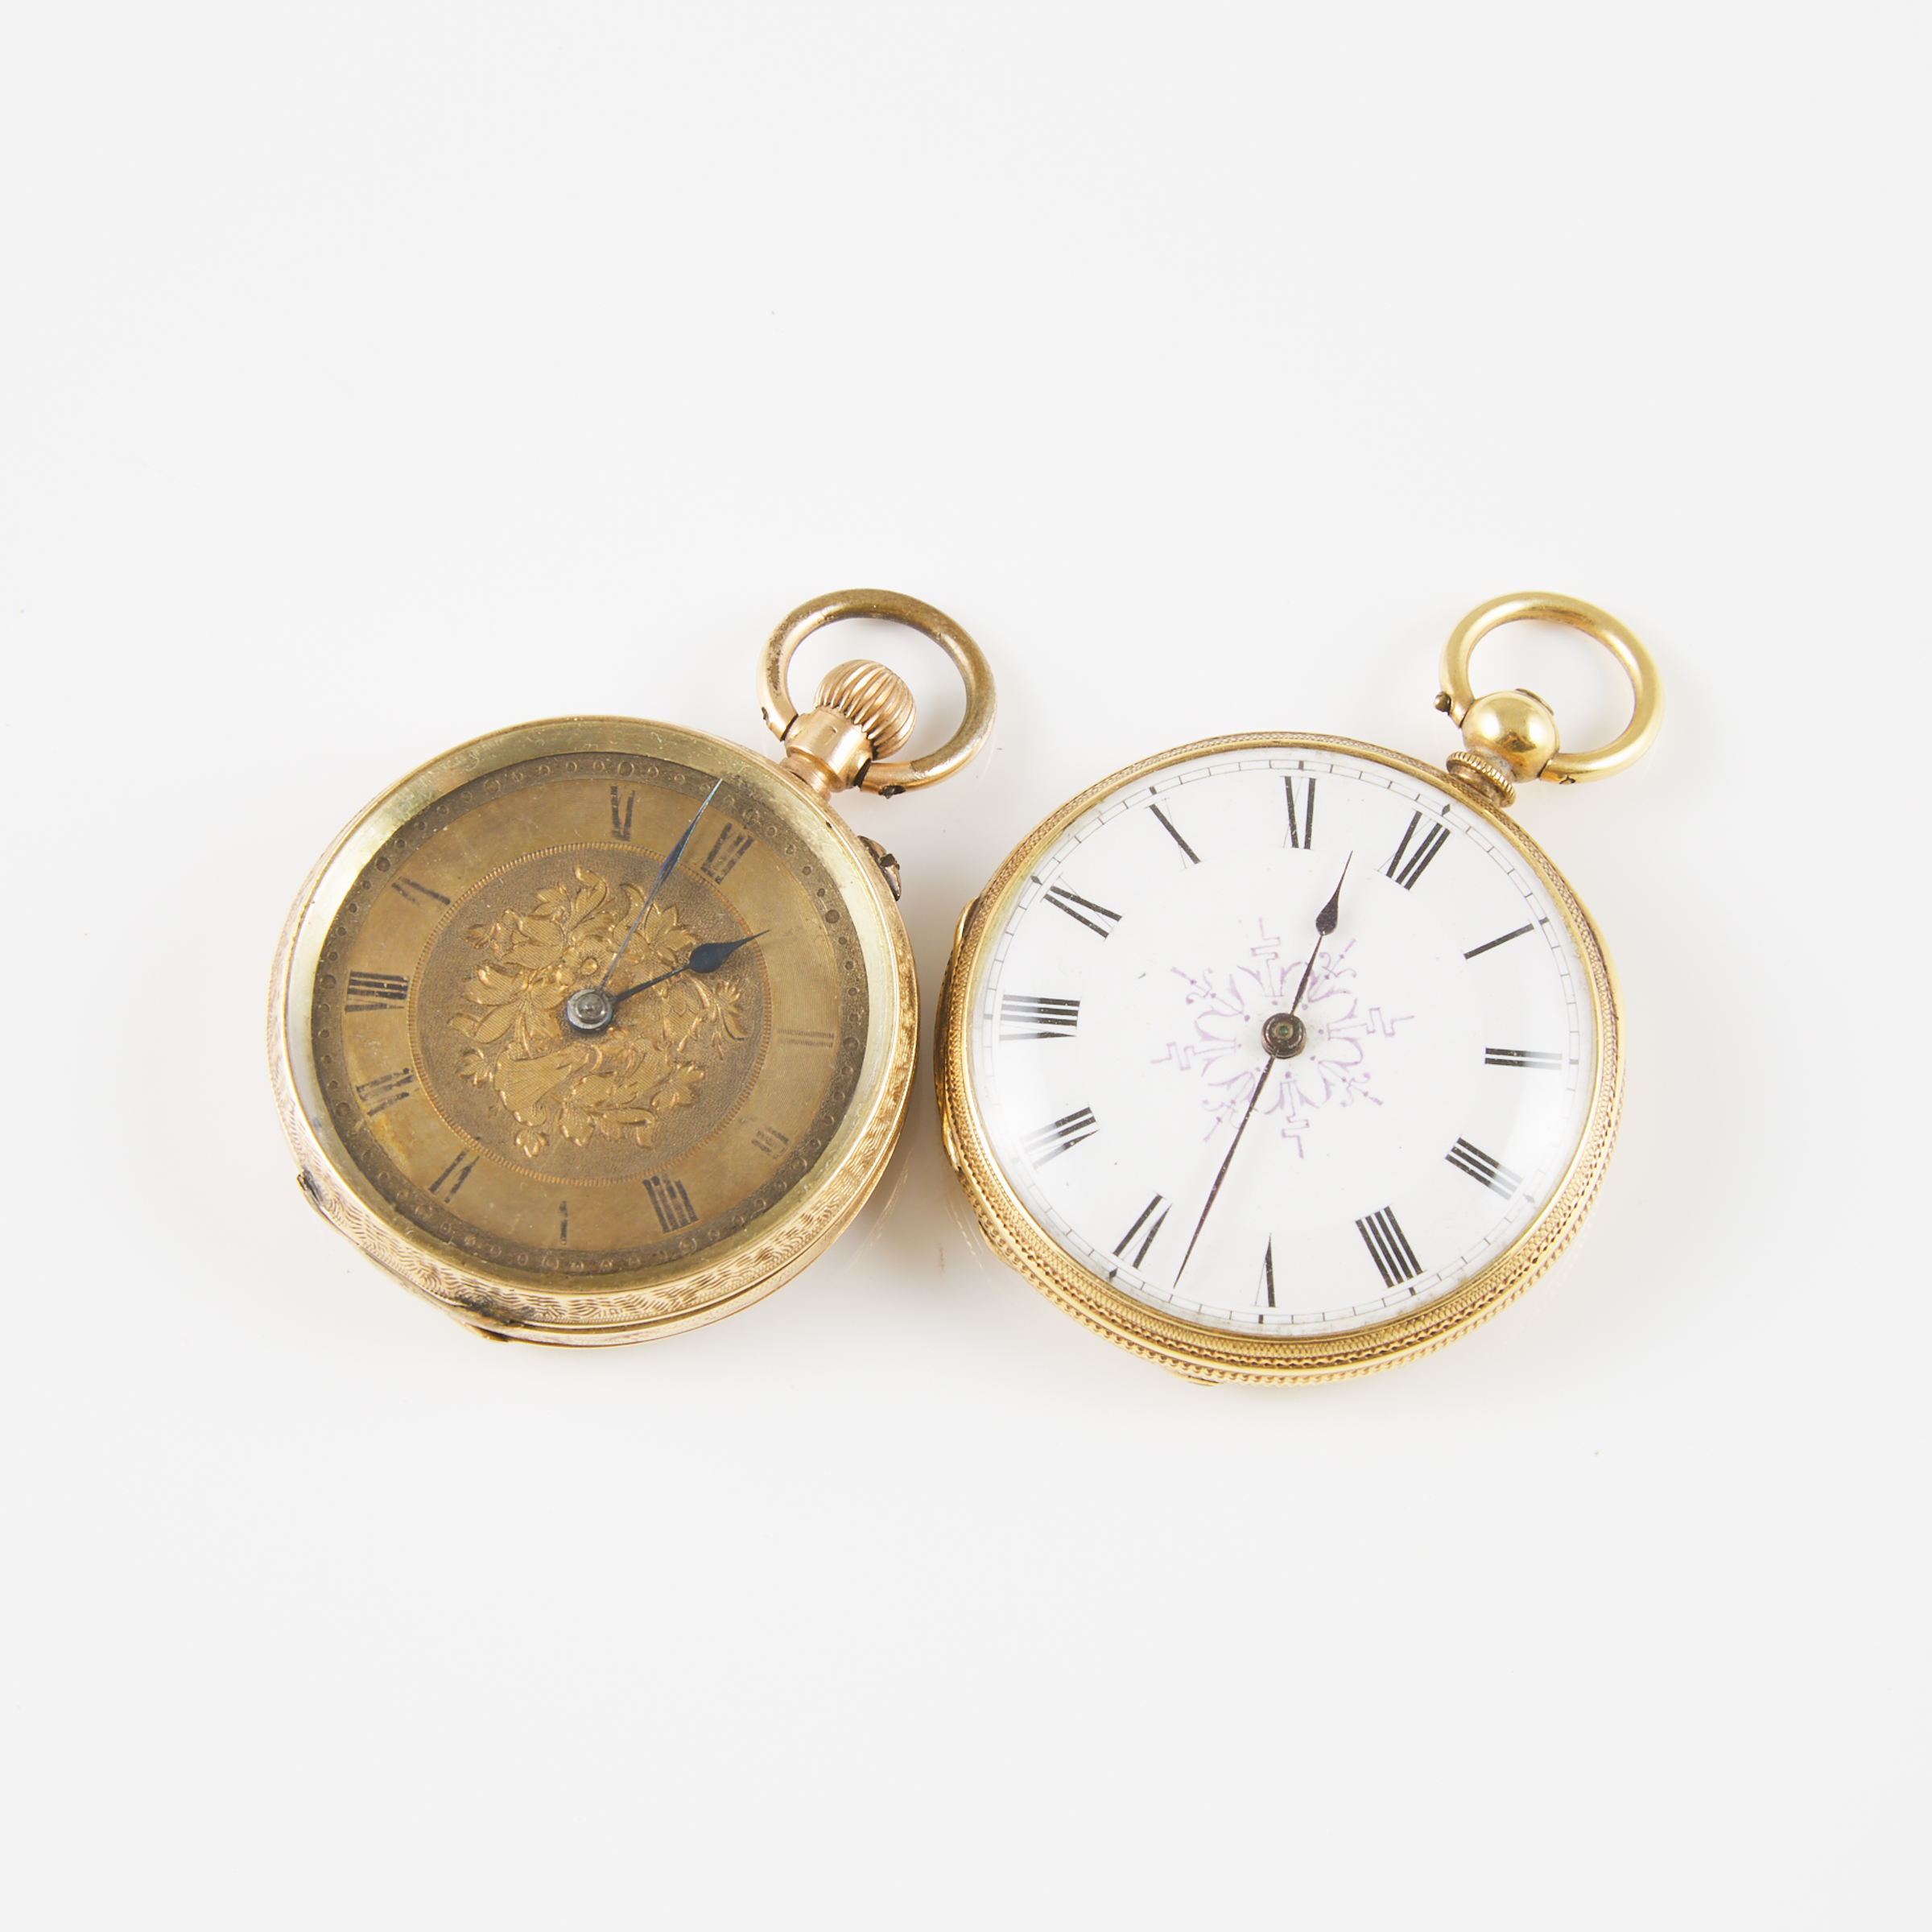 2 x Lady's 19th Century Key Wind, Openface Pocket Watches